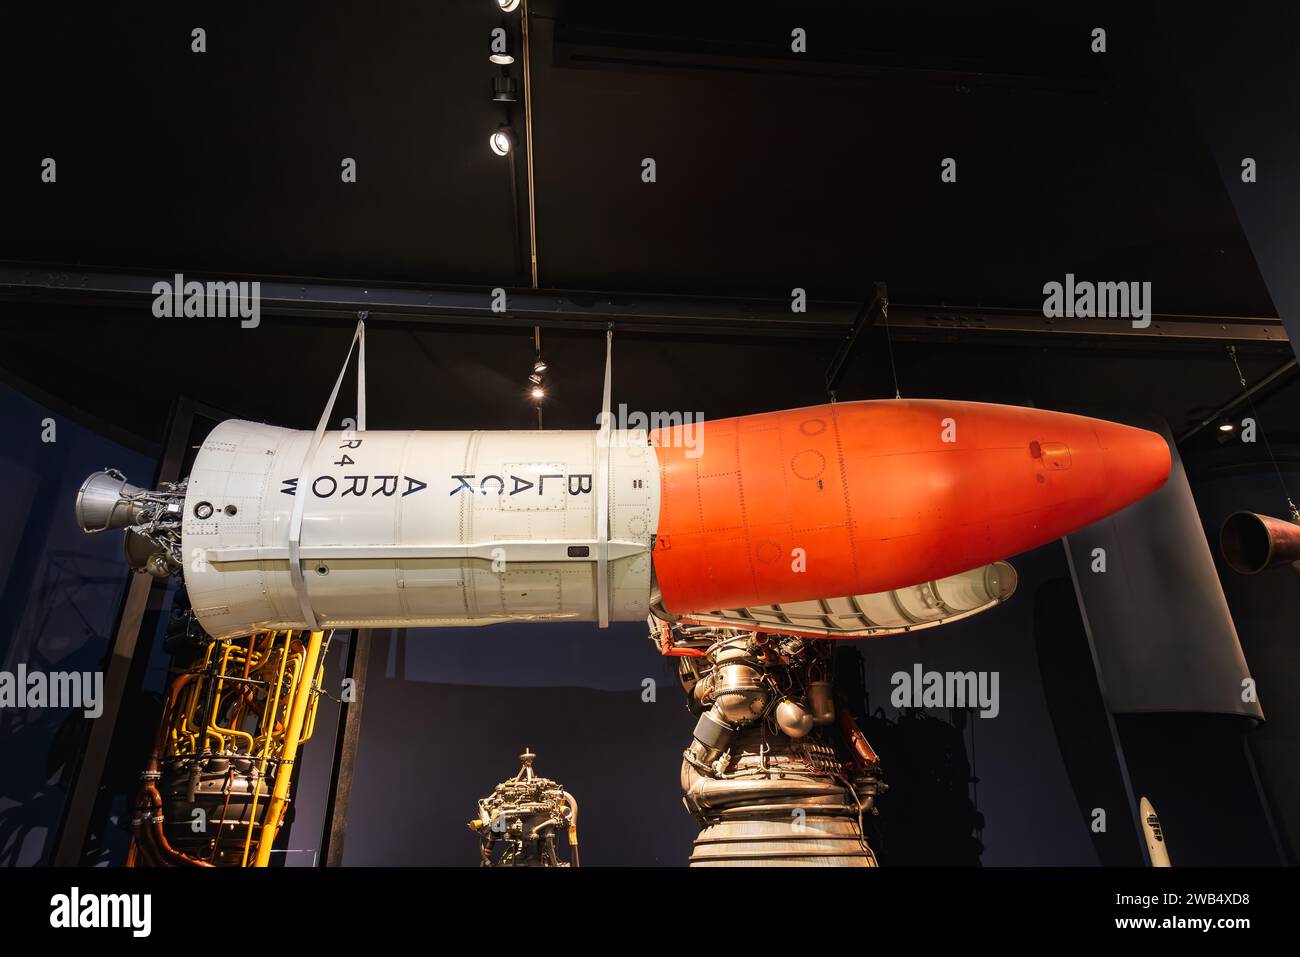 London, UK - May 19, 2023: Black Arrow, a British satellite expendable launch system, exposed at Science Museum of London, England, United Kingdom Stock Photo